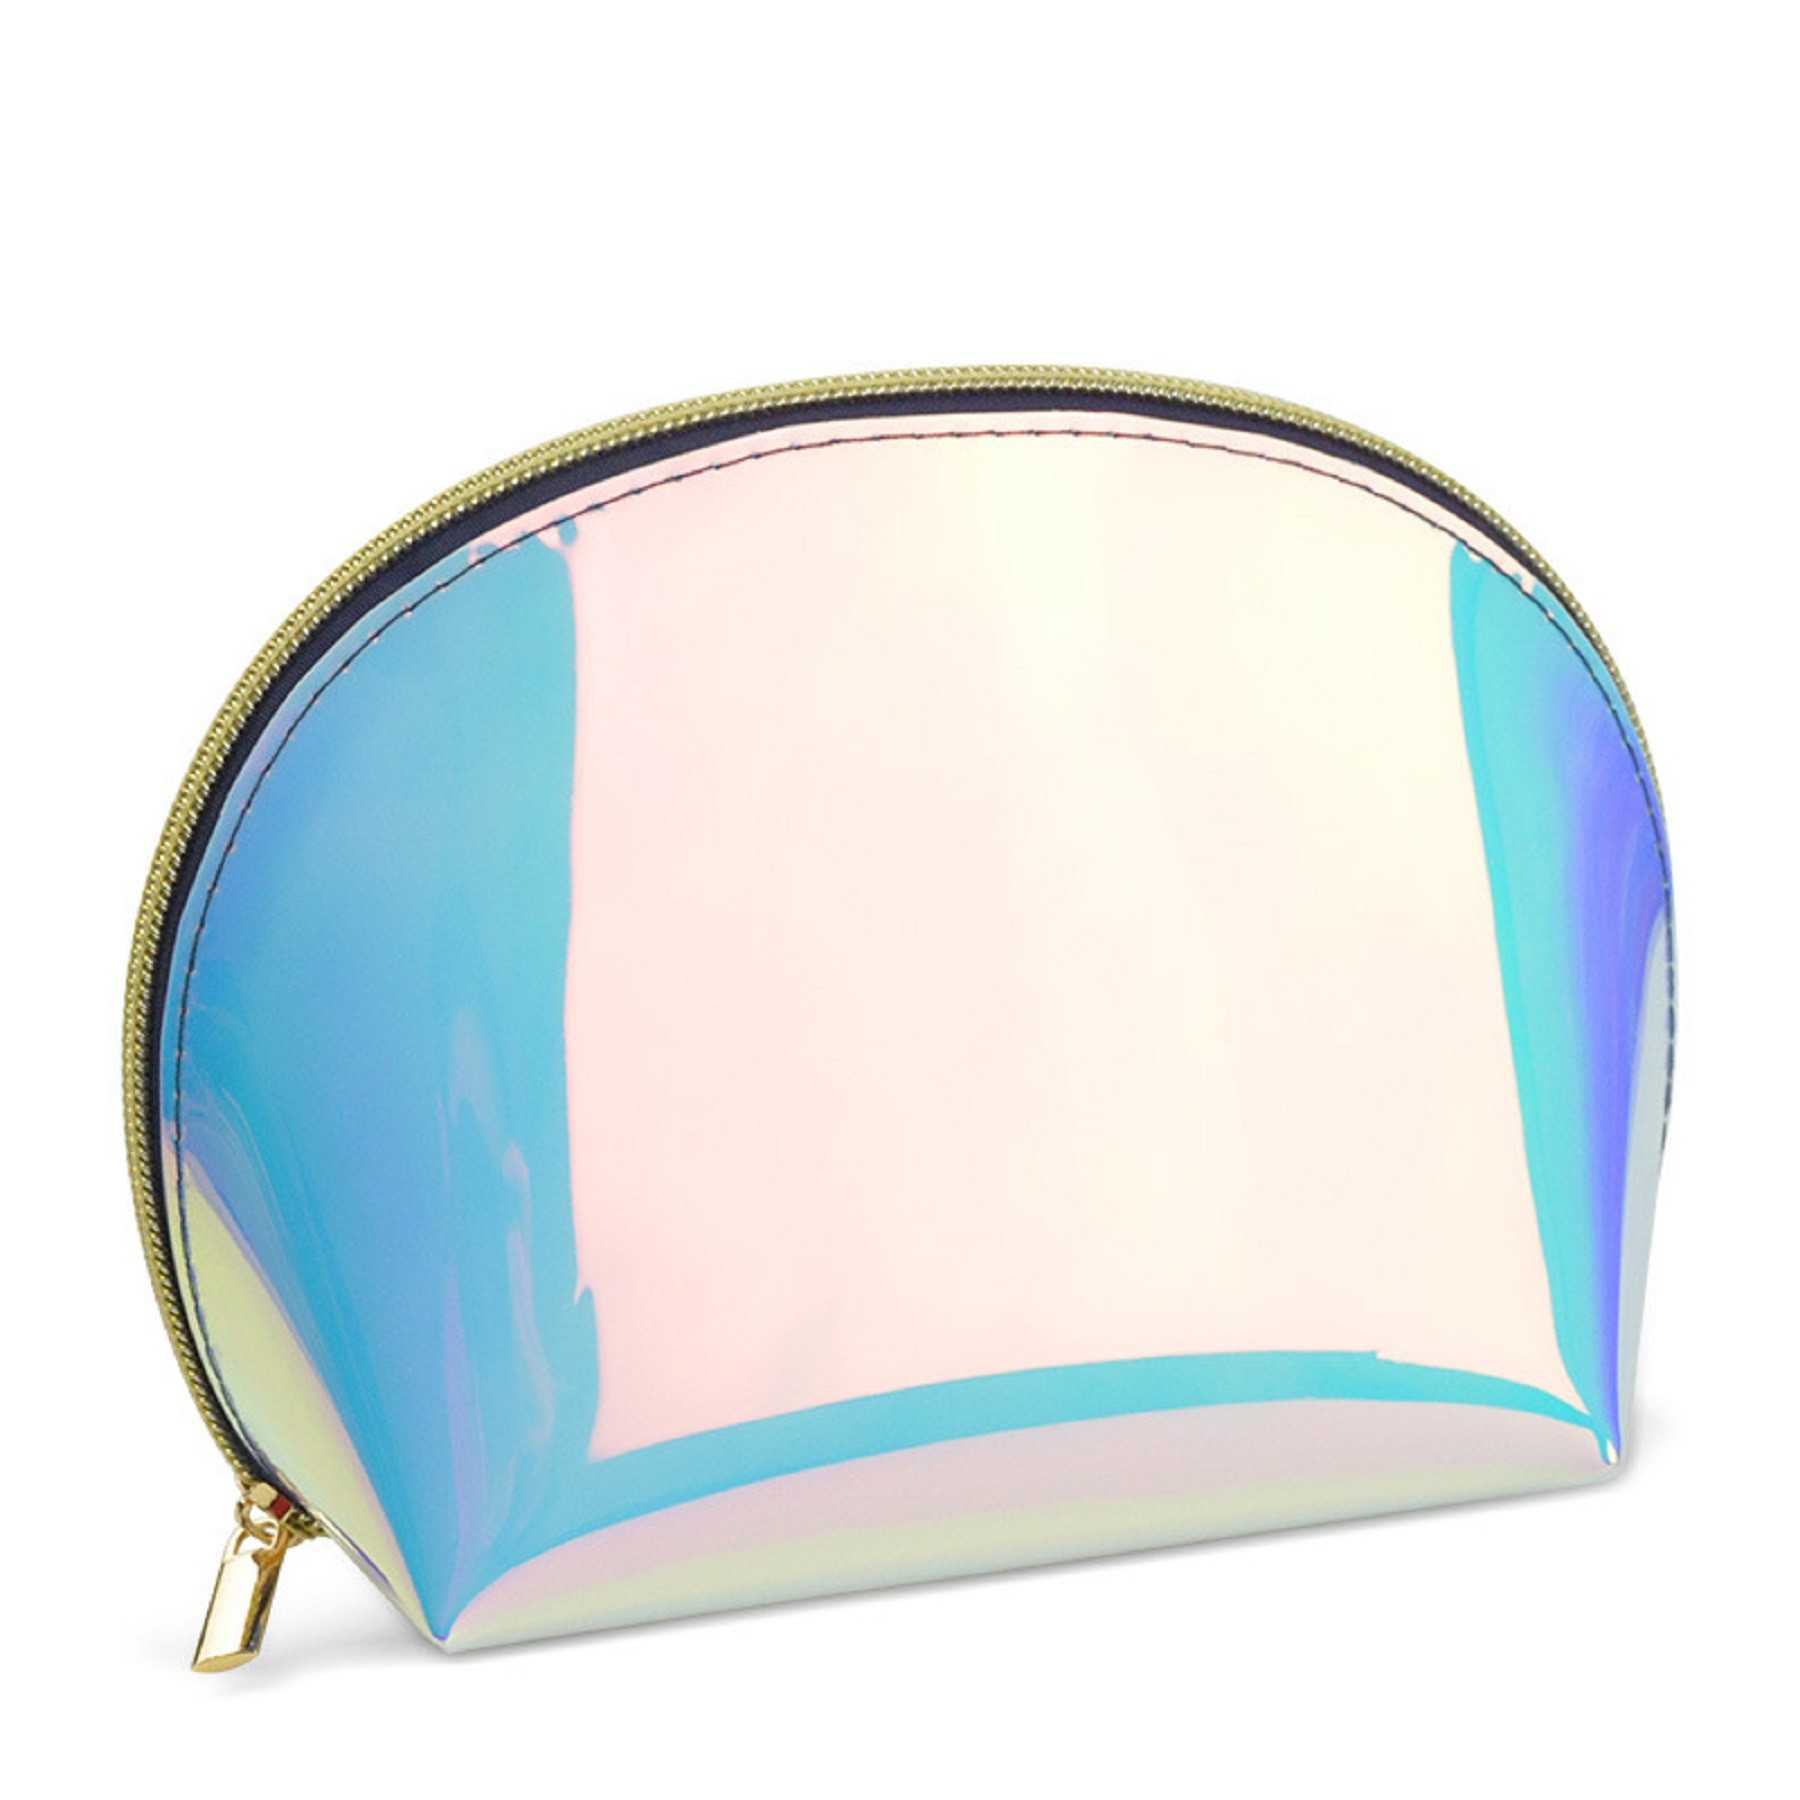 PVC holographic Cosmetic Bag,PVC Holographic Cosmetic Bag Supplier And Wholesaler In China,COSMETIC BAG